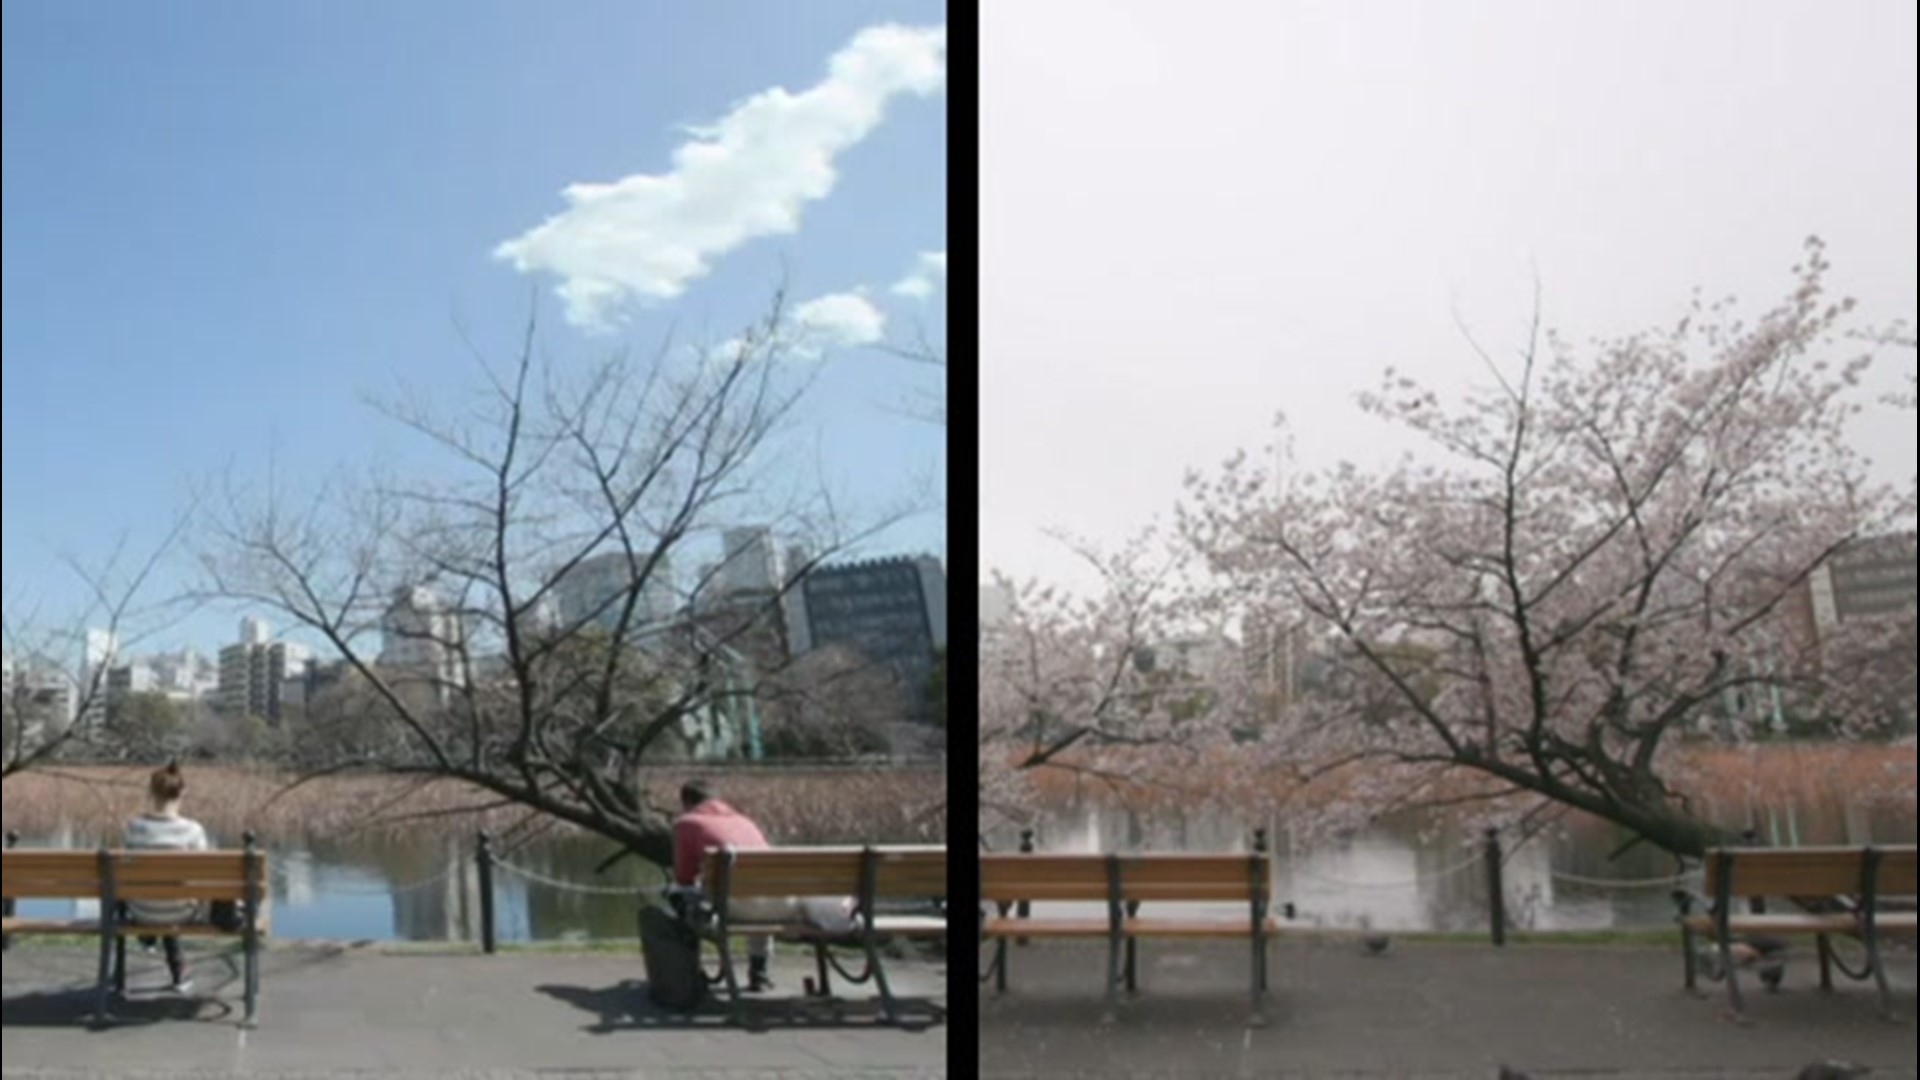 Japan's famed cherry blossoms are blooming, but there's few people out and about to see them due to the COVID-19 pandemic.